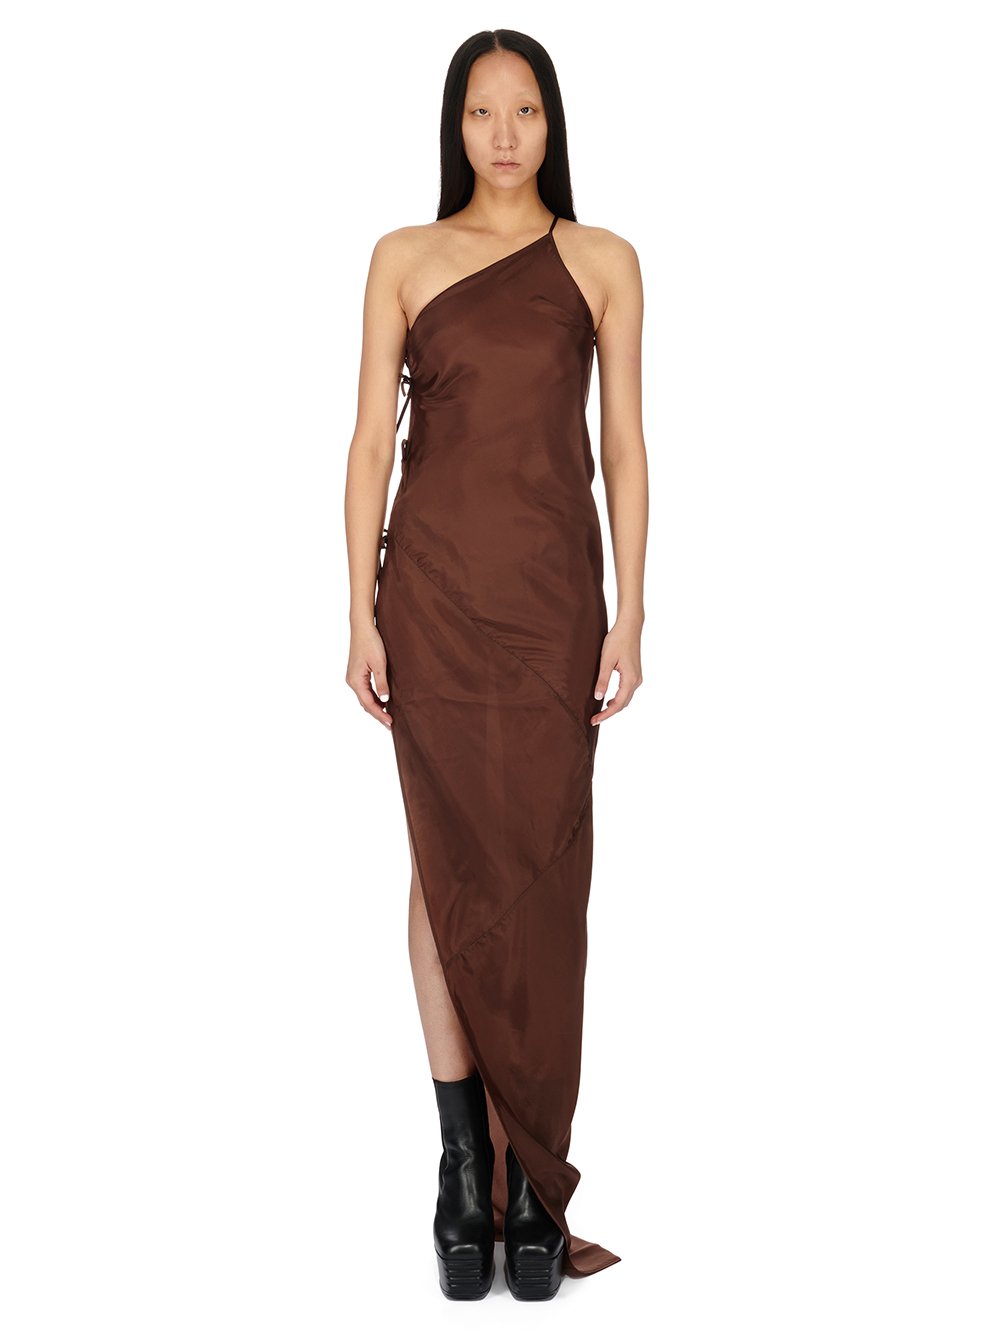 RICK OWENS FW23 LUXOR TACO GOWN IN BROWN CUPRO JAPONETTE